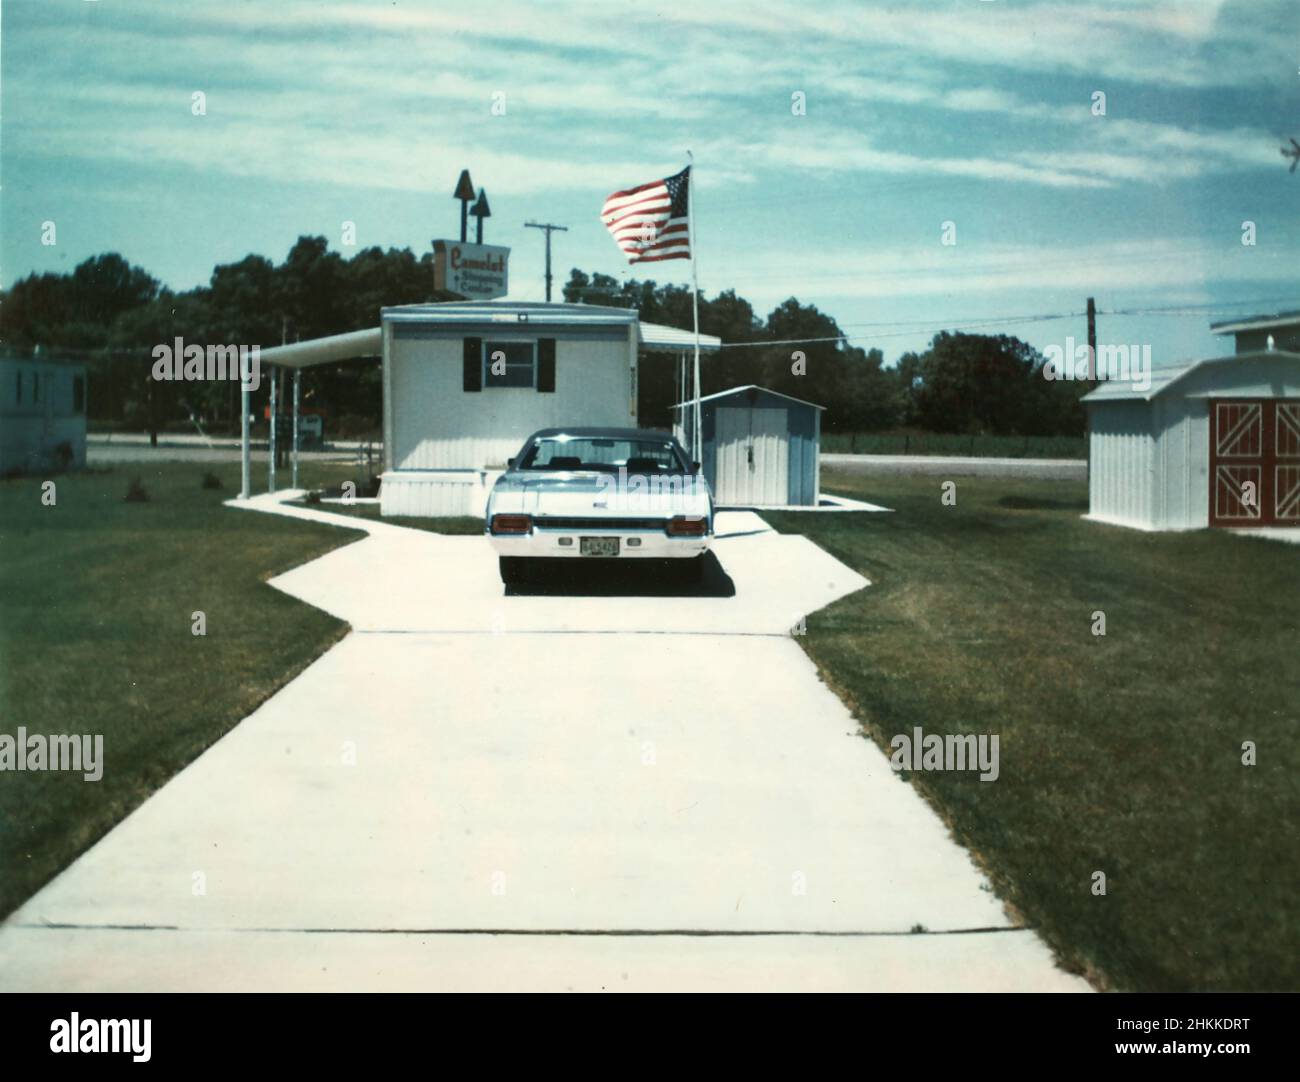 Abstract view of a car and mobile home in a trailer park in Indiana, ca. 1970. Stock Photo